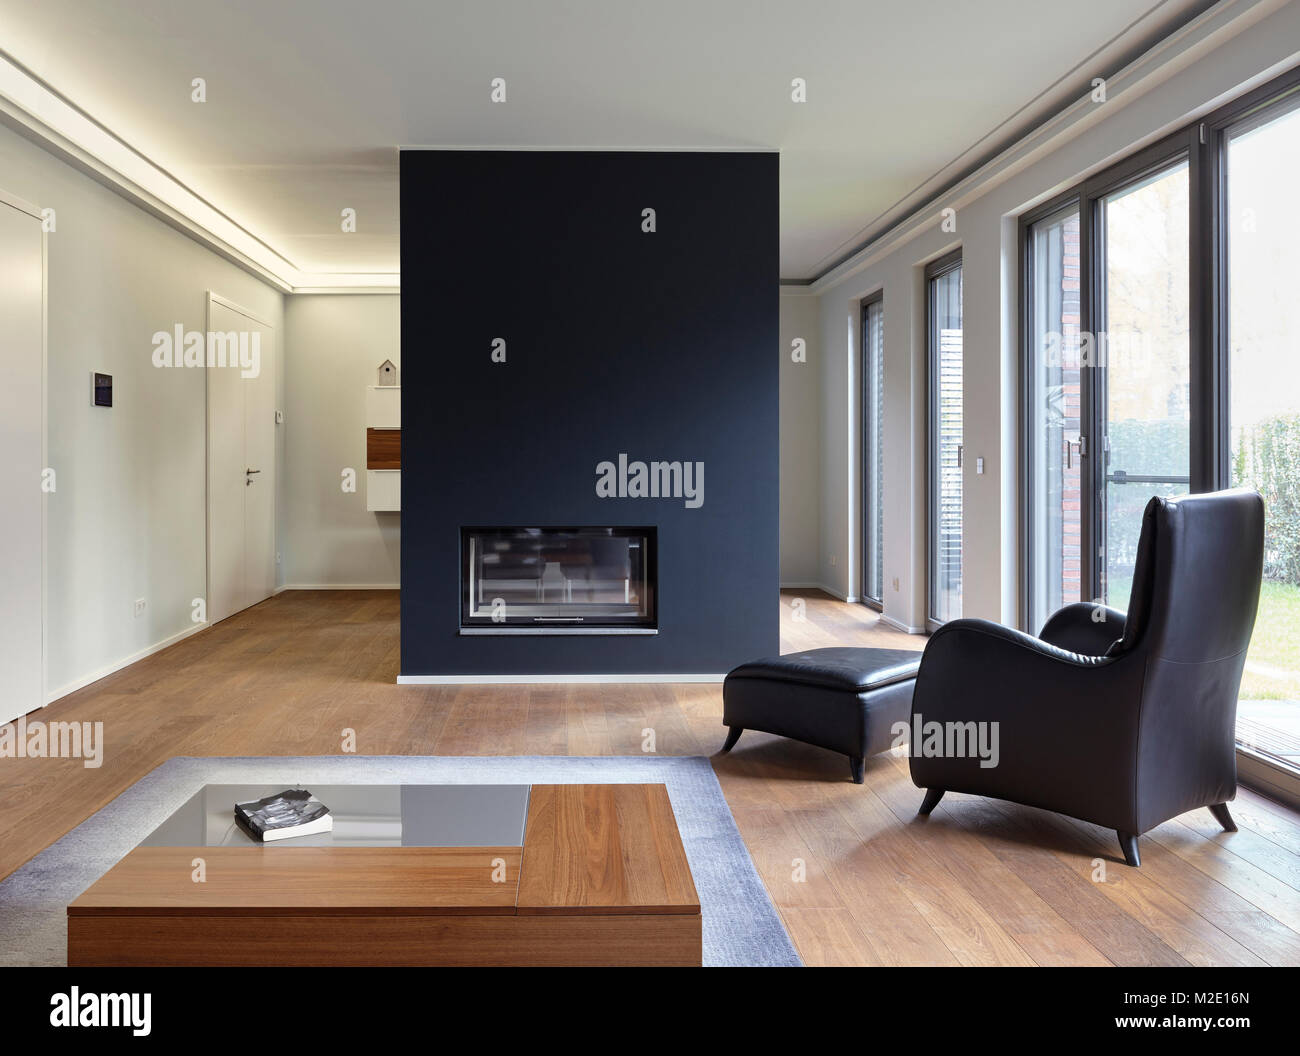 Plank floor and modern fireplace in home Stock Photo